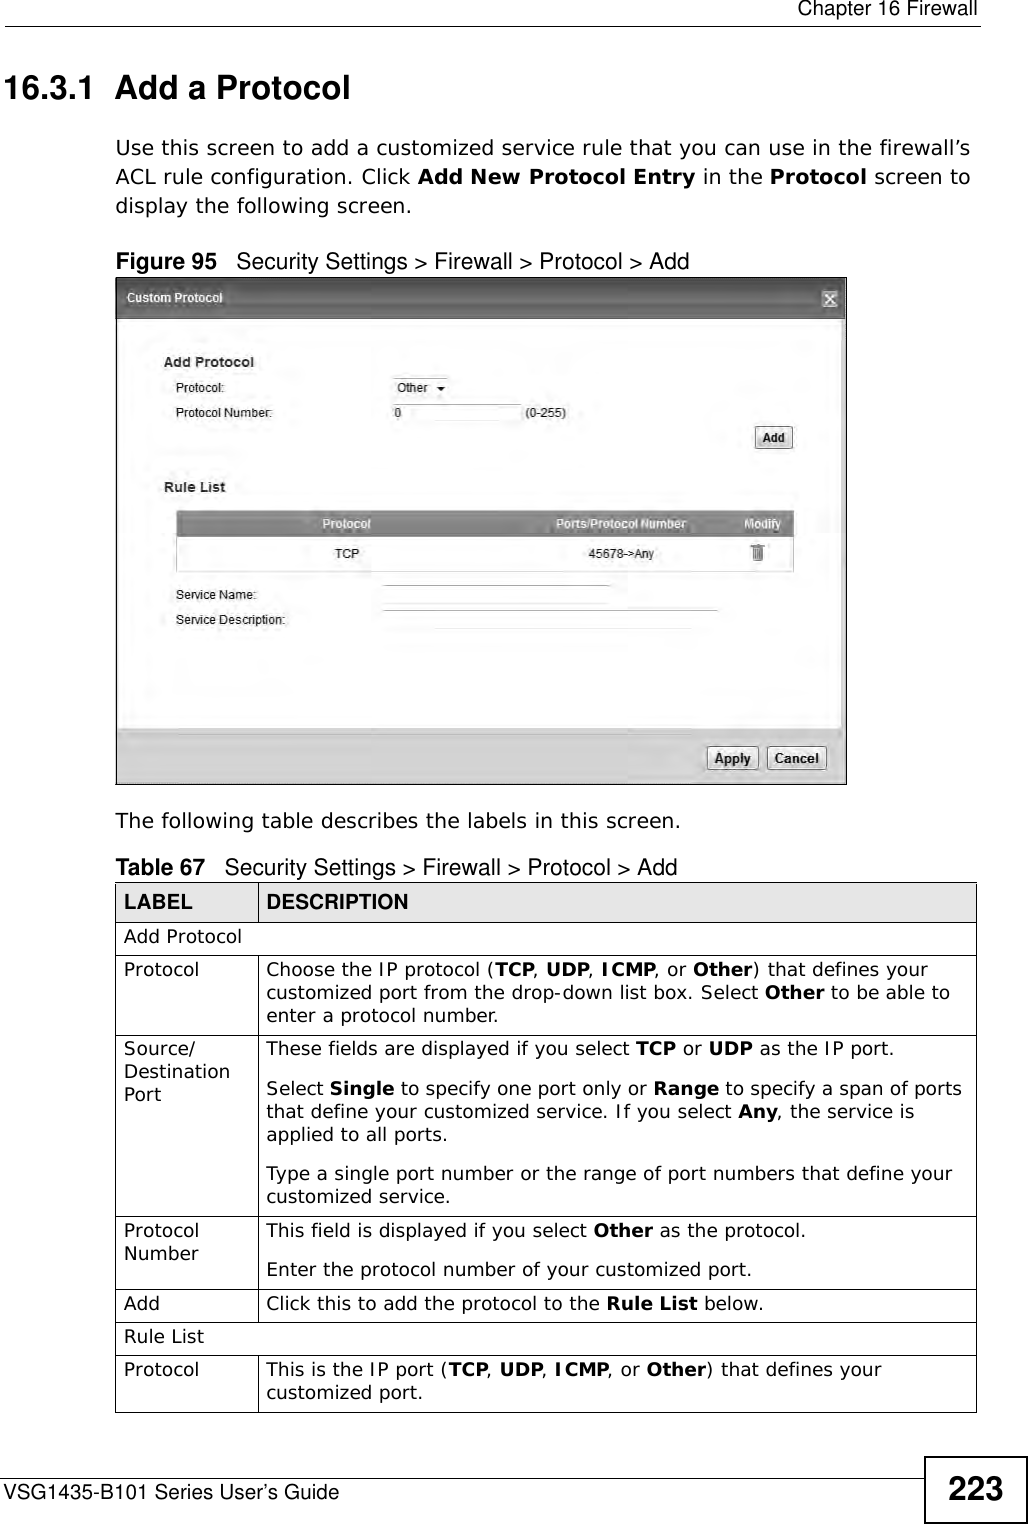  Chapter 16 FirewallVSG1435-B101 Series User’s Guide 22316.3.1  Add a Protocol  Use this screen to add a customized service rule that you can use in the firewall’s ACL rule configuration. Click Add New Protocol Entry in the Protocol screen to display the following screen.Figure 95   Security Settings &gt; Firewall &gt; Protocol &gt; AddThe following table describes the labels in this screen.Table 67   Security Settings &gt; Firewall &gt; Protocol &gt; AddLABEL DESCRIPTIONAdd ProtocolProtocol Choose the IP protocol (TCP, UDP, ICMP, or Other) that defines your customized port from the drop-down list box. Select Other to be able to enter a protocol number.Source/Destination PortThese fields are displayed if you select TCP or UDP as the IP port. Select Single to specify one port only or Range to specify a span of ports that define your customized service. If you select Any, the service is applied to all ports.Type a single port number or the range of port numbers that define your customized service.Protocol Number This field is displayed if you select Other as the protocol.Enter the protocol number of your customized port. Add Click this to add the protocol to the Rule List below.Rule ListProtocol This is the IP port (TCP, UDP, ICMP, or Other) that defines your customized port.